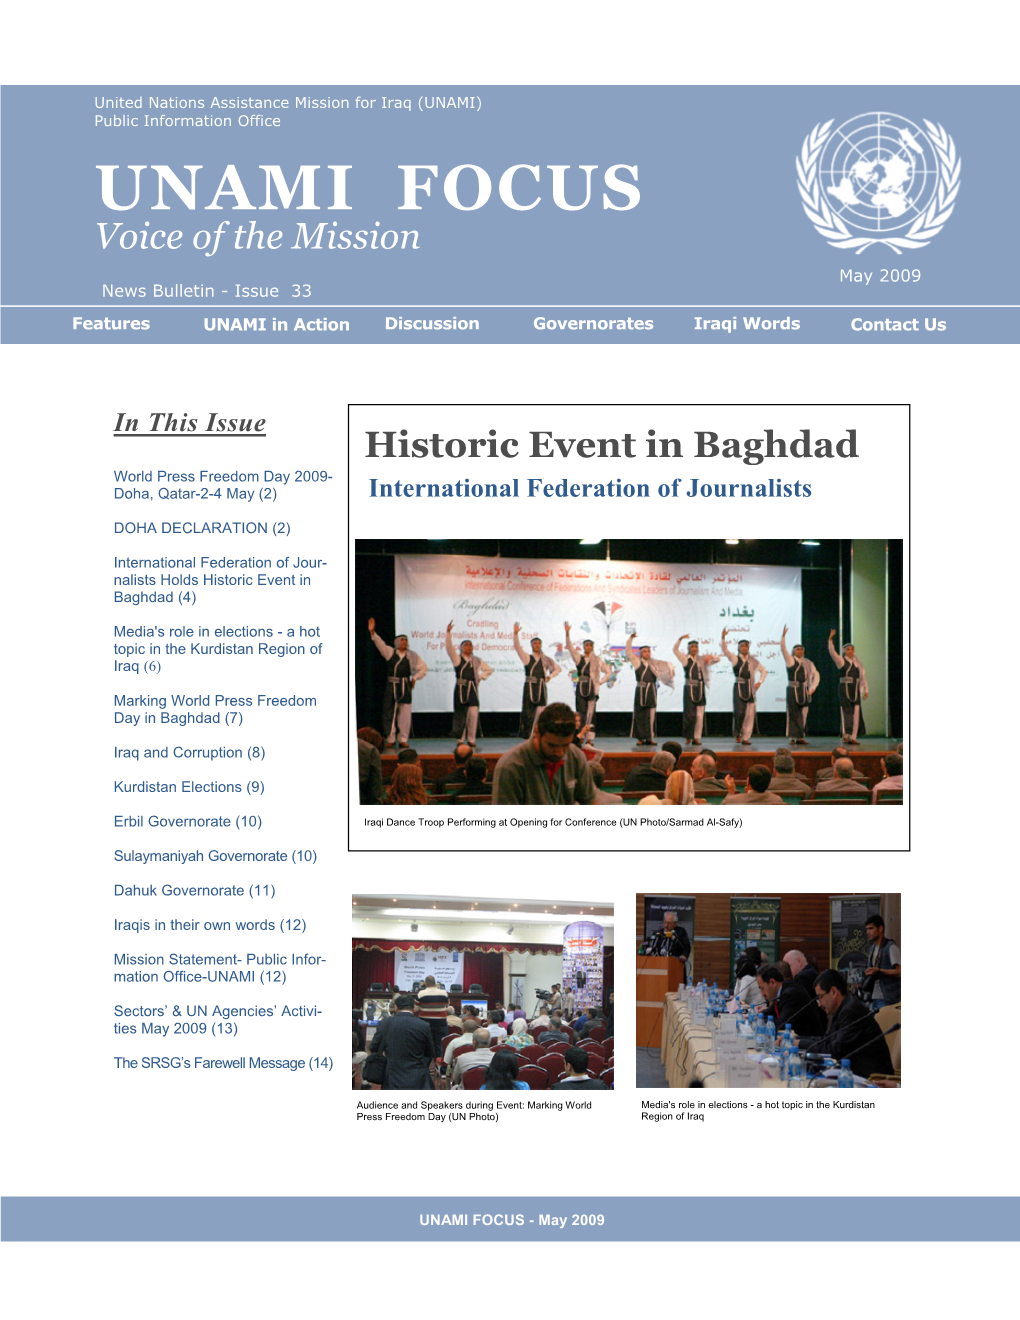 UNAMI FOCUS Voice of the Mission May 2009 News Bulletin - Issue 33